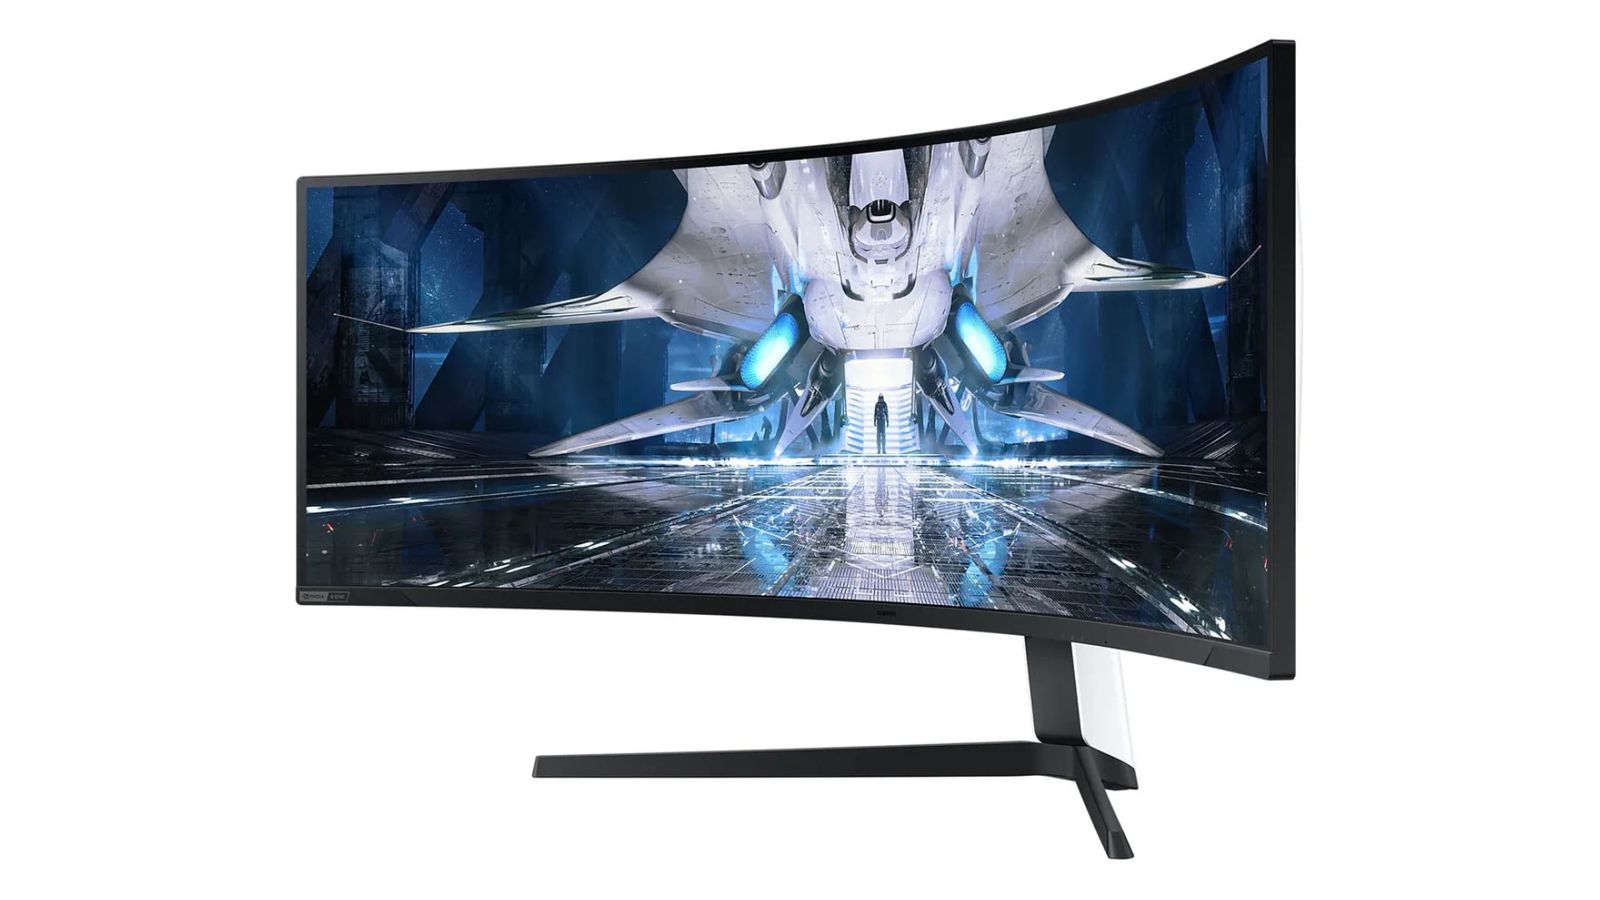 Samsung Odyssey Neo G9 product image of a ultrawide curved monitor with a black frame.